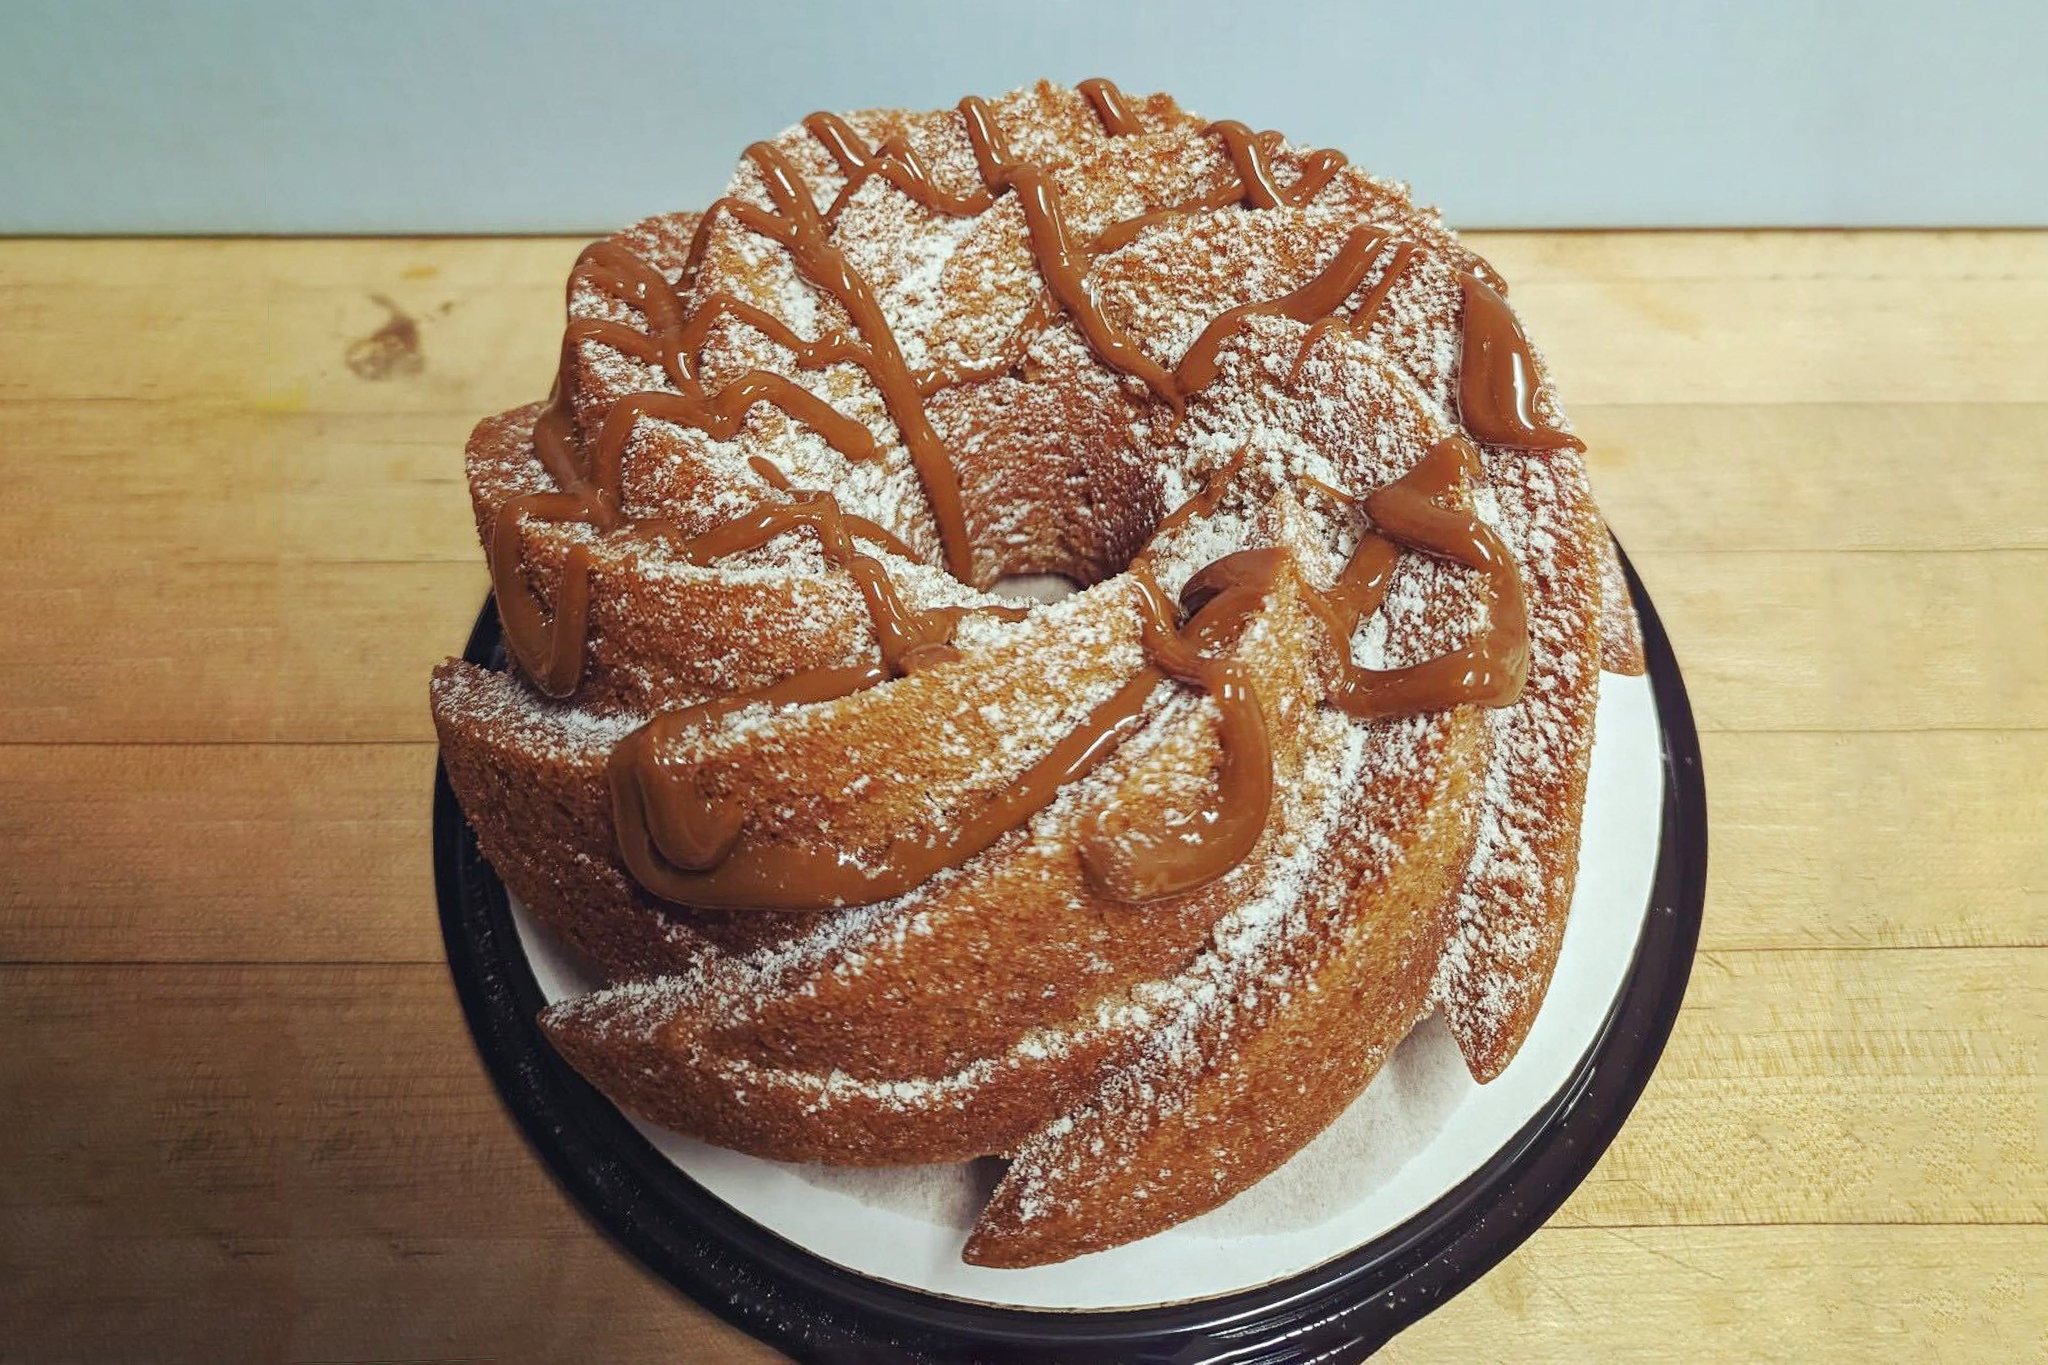 Have-It-Your-Way Almond Cake: A very play aroundable recipe for Passover